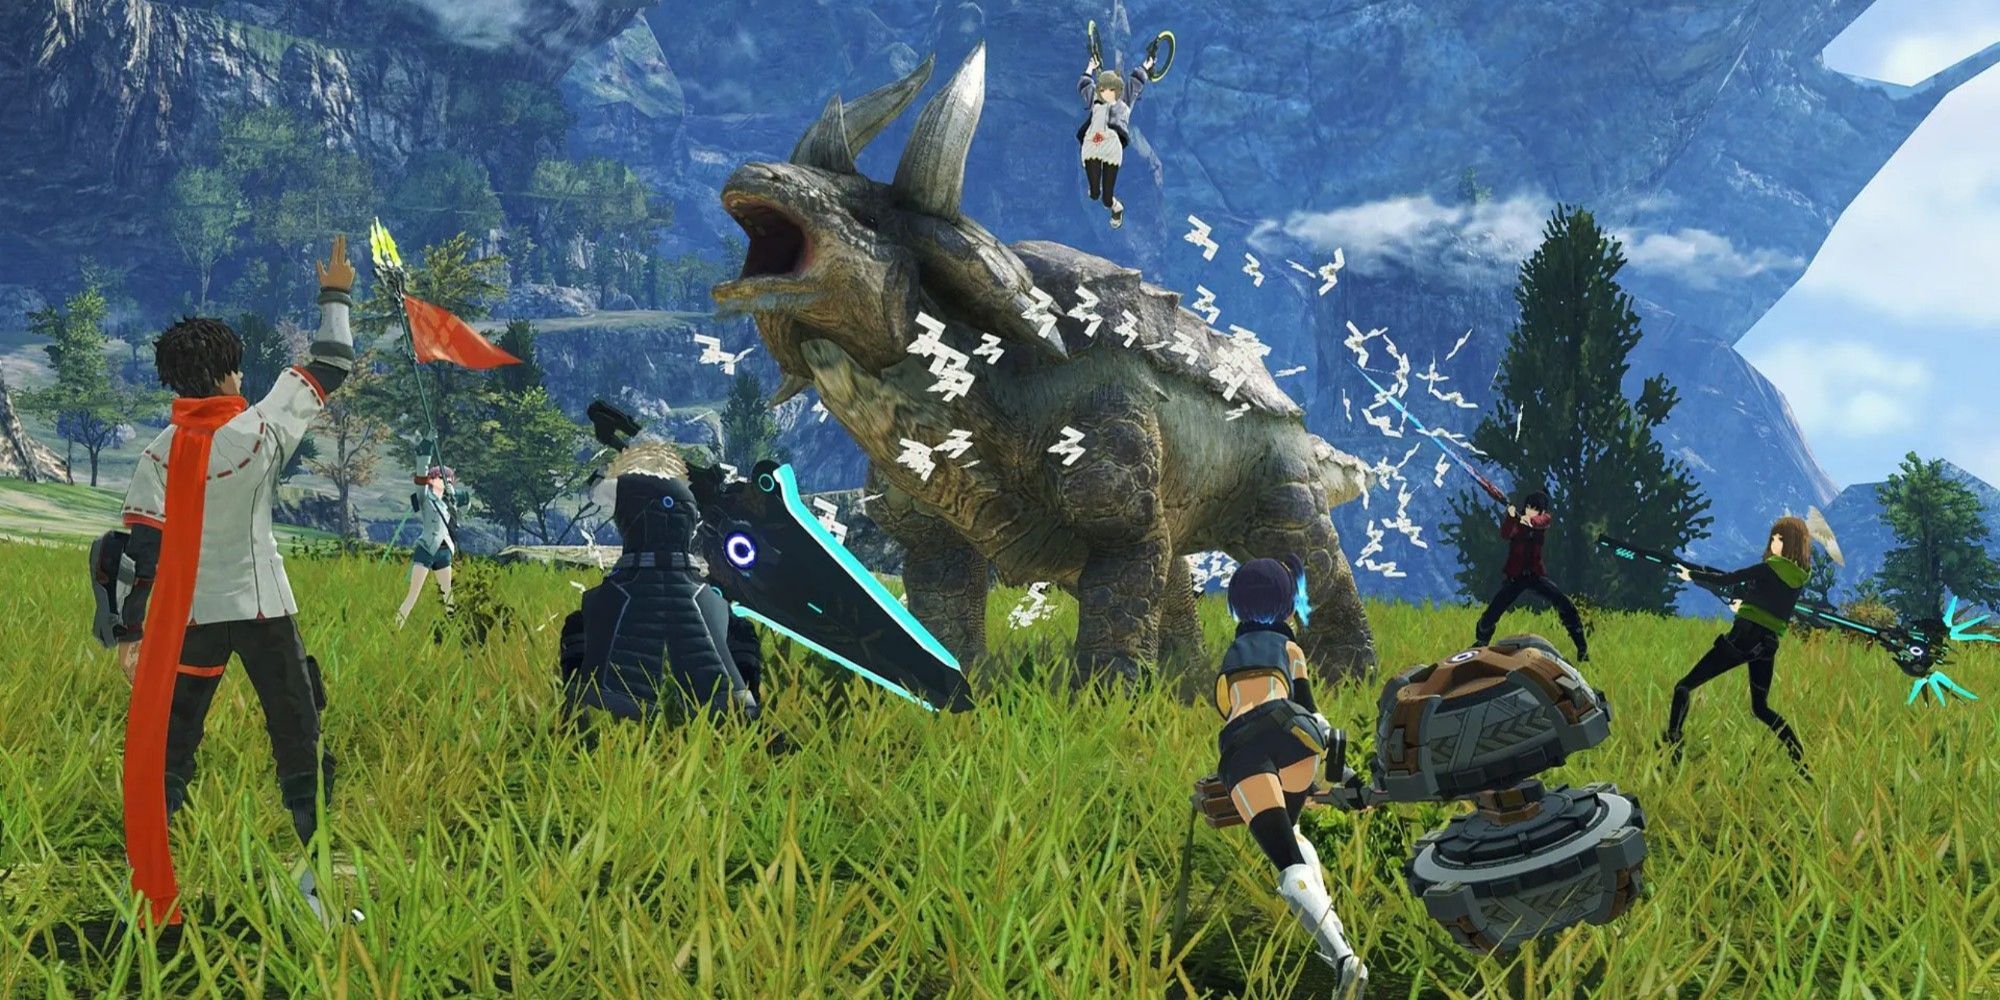 Full of fun fighting monsters in Xenoblade Chronicles 3